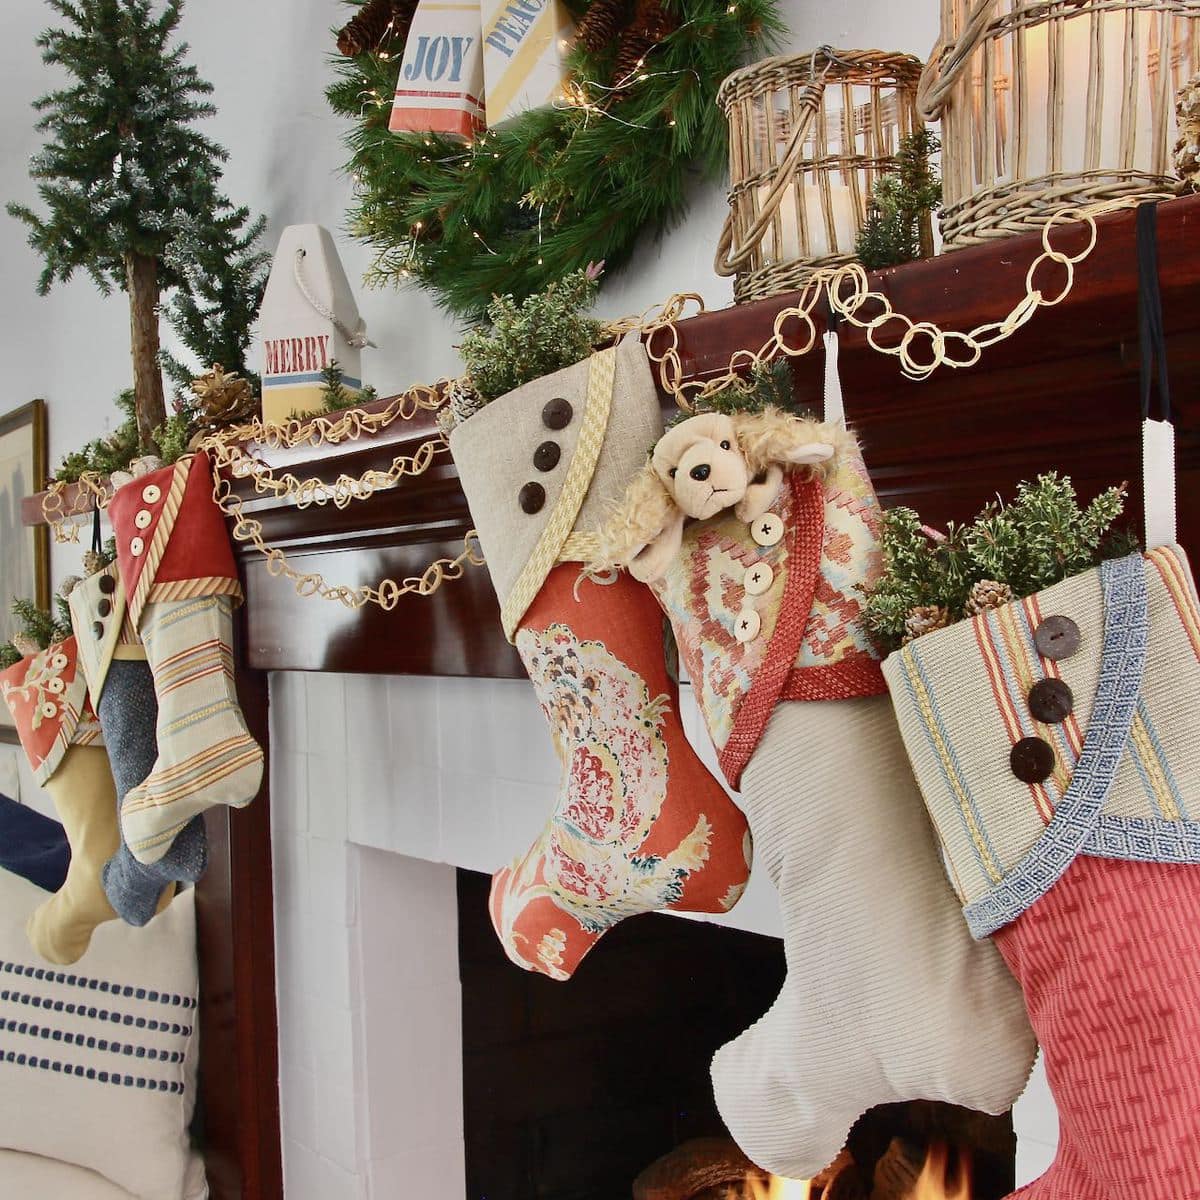 Sideview on Coastal Christmas Stockings hanging at successively lower heights, three on each side of the fireplace with wooden buoys stamped "peace", "joy" and "merry" with greens on the mantel